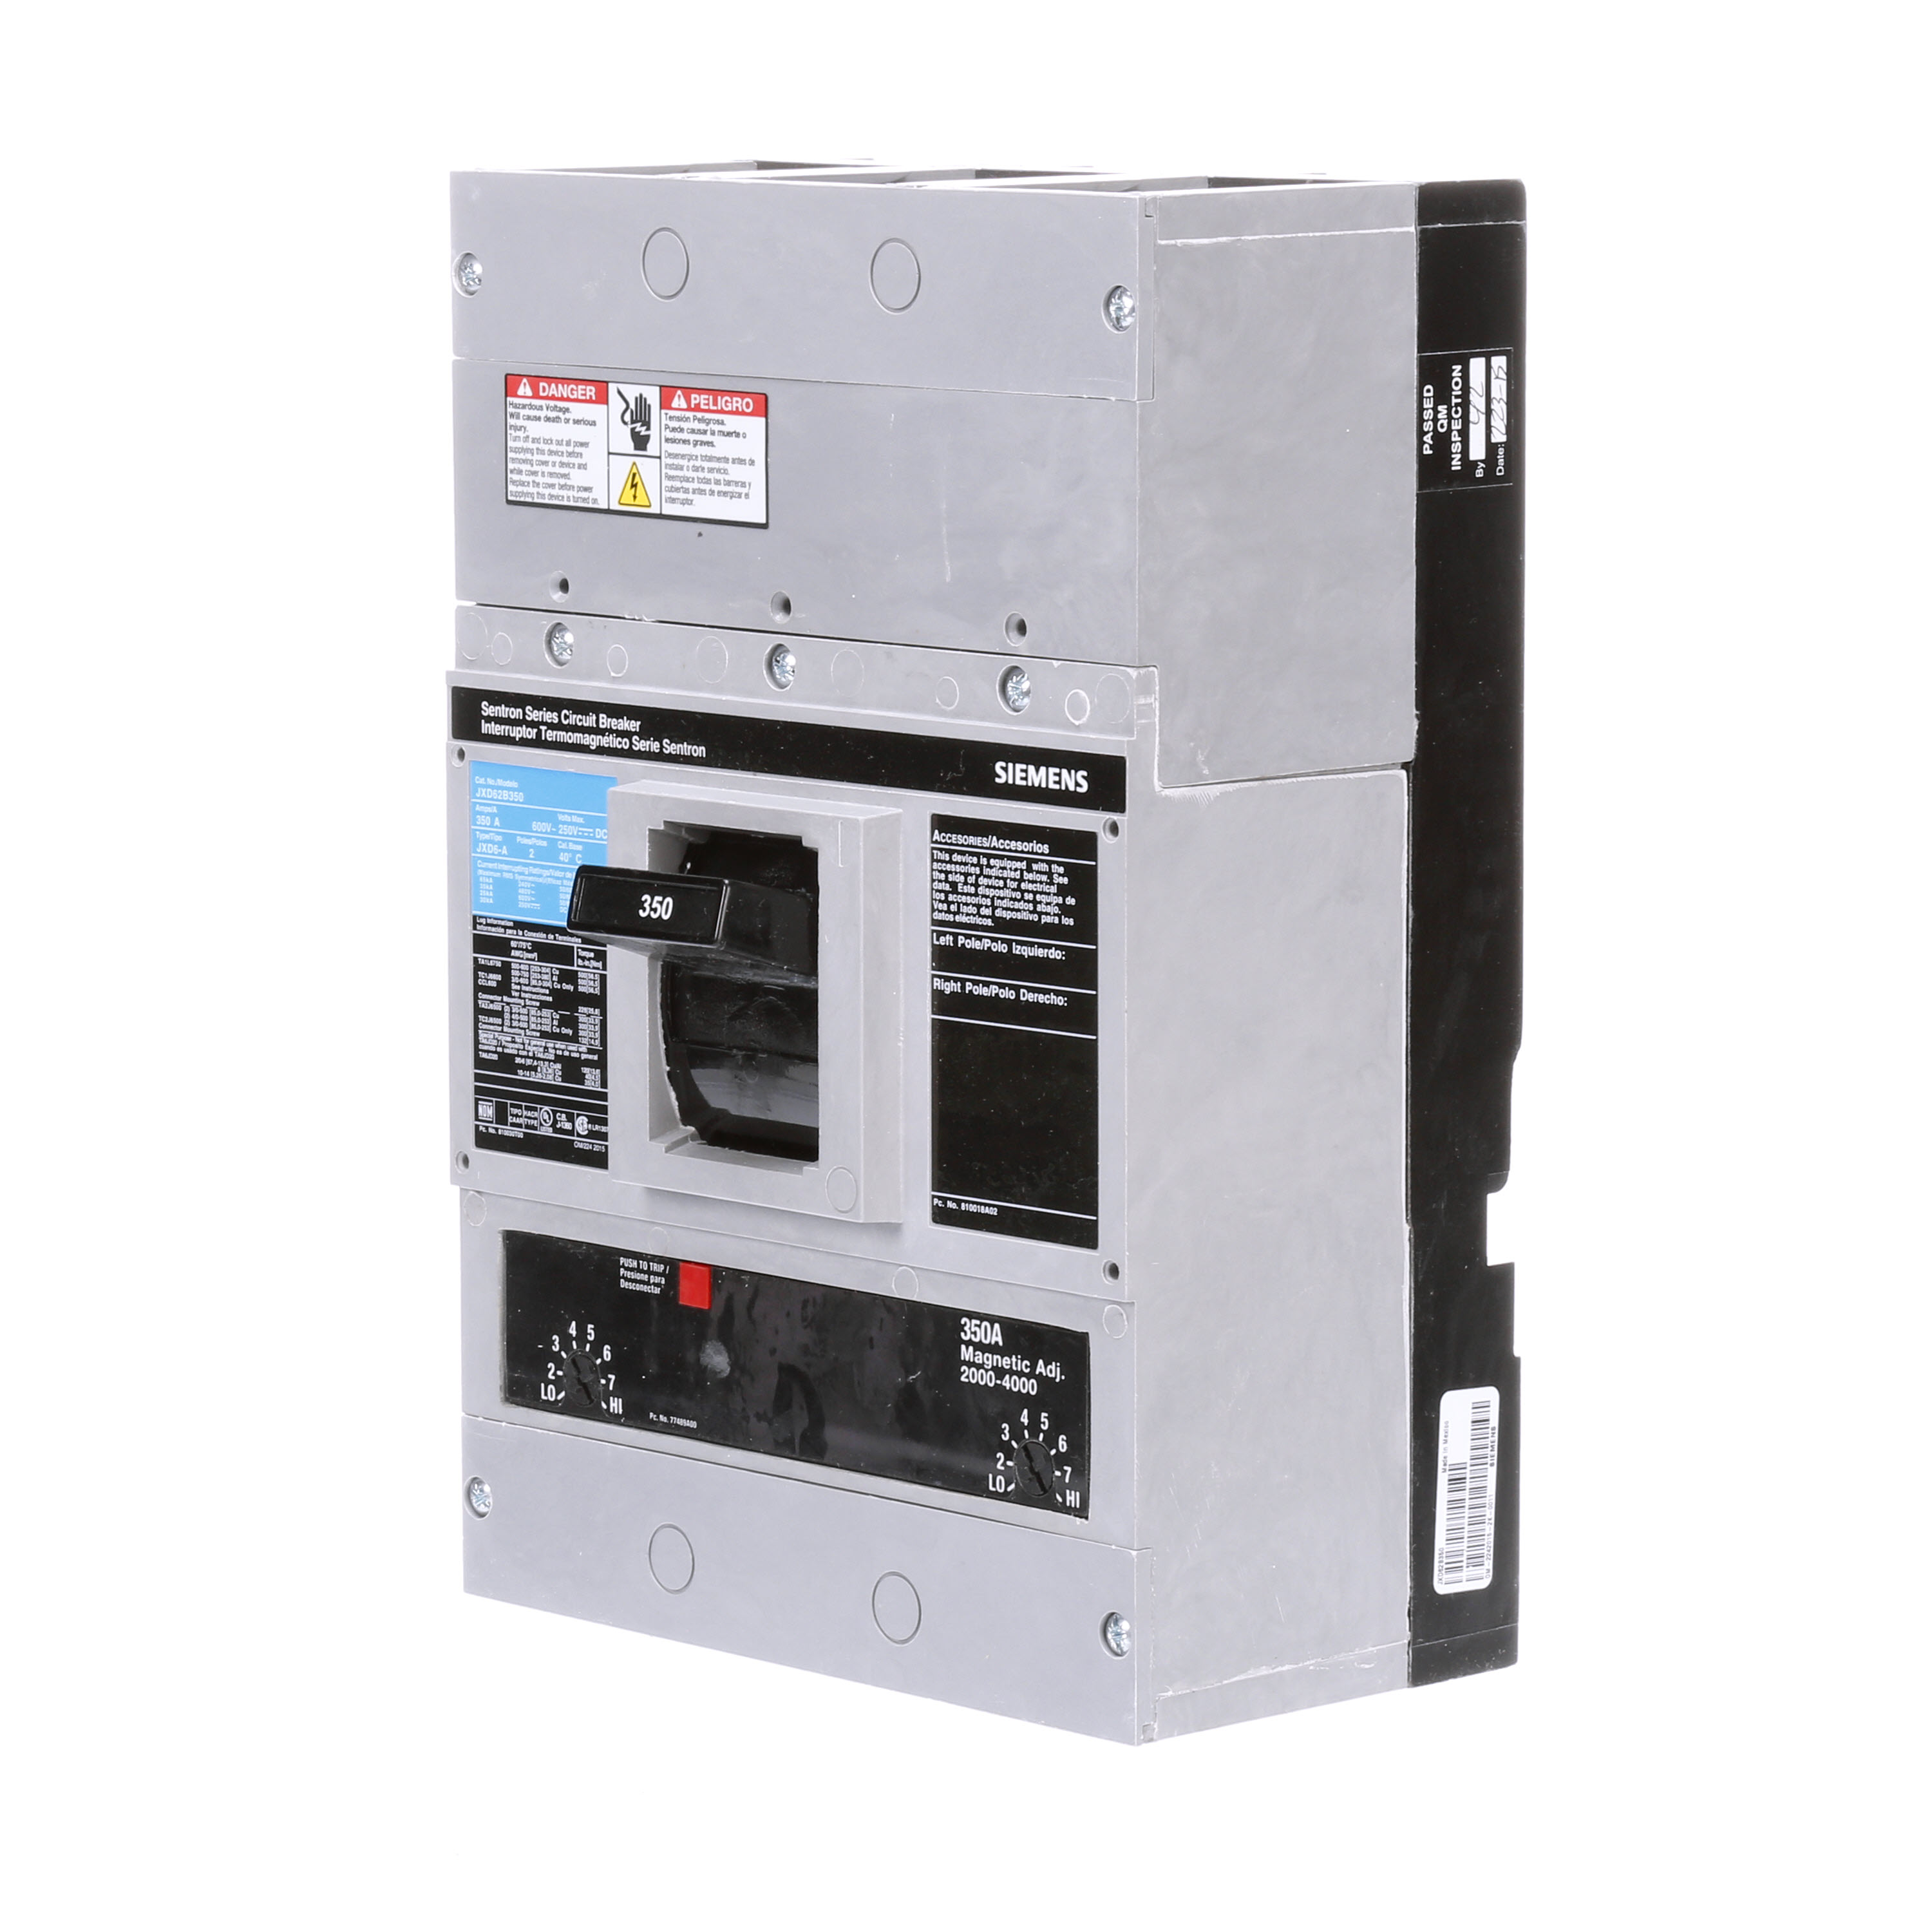 SIEMENS LOW VOLTAGE SENTRON MOLDED CASE CIRCUIT BREAKER WITH THERMAL - MAGNETICTRIP UNIT. ASSEMBLED STANDARD 40 DEG C BREAKER JD FRAME WITH STANDARD BREAKING CAPACITY. 350A 2-POLE (25KAIC AT 600V) (35KAIC AT 480V). NON-INTERCHANGEABLE TRIP UNIT. SPECIAL FEATURES NO LUGS INSTALLED. DIMENSIONS (W x H x D) IN 7.50 x 11.0 x 4.00.